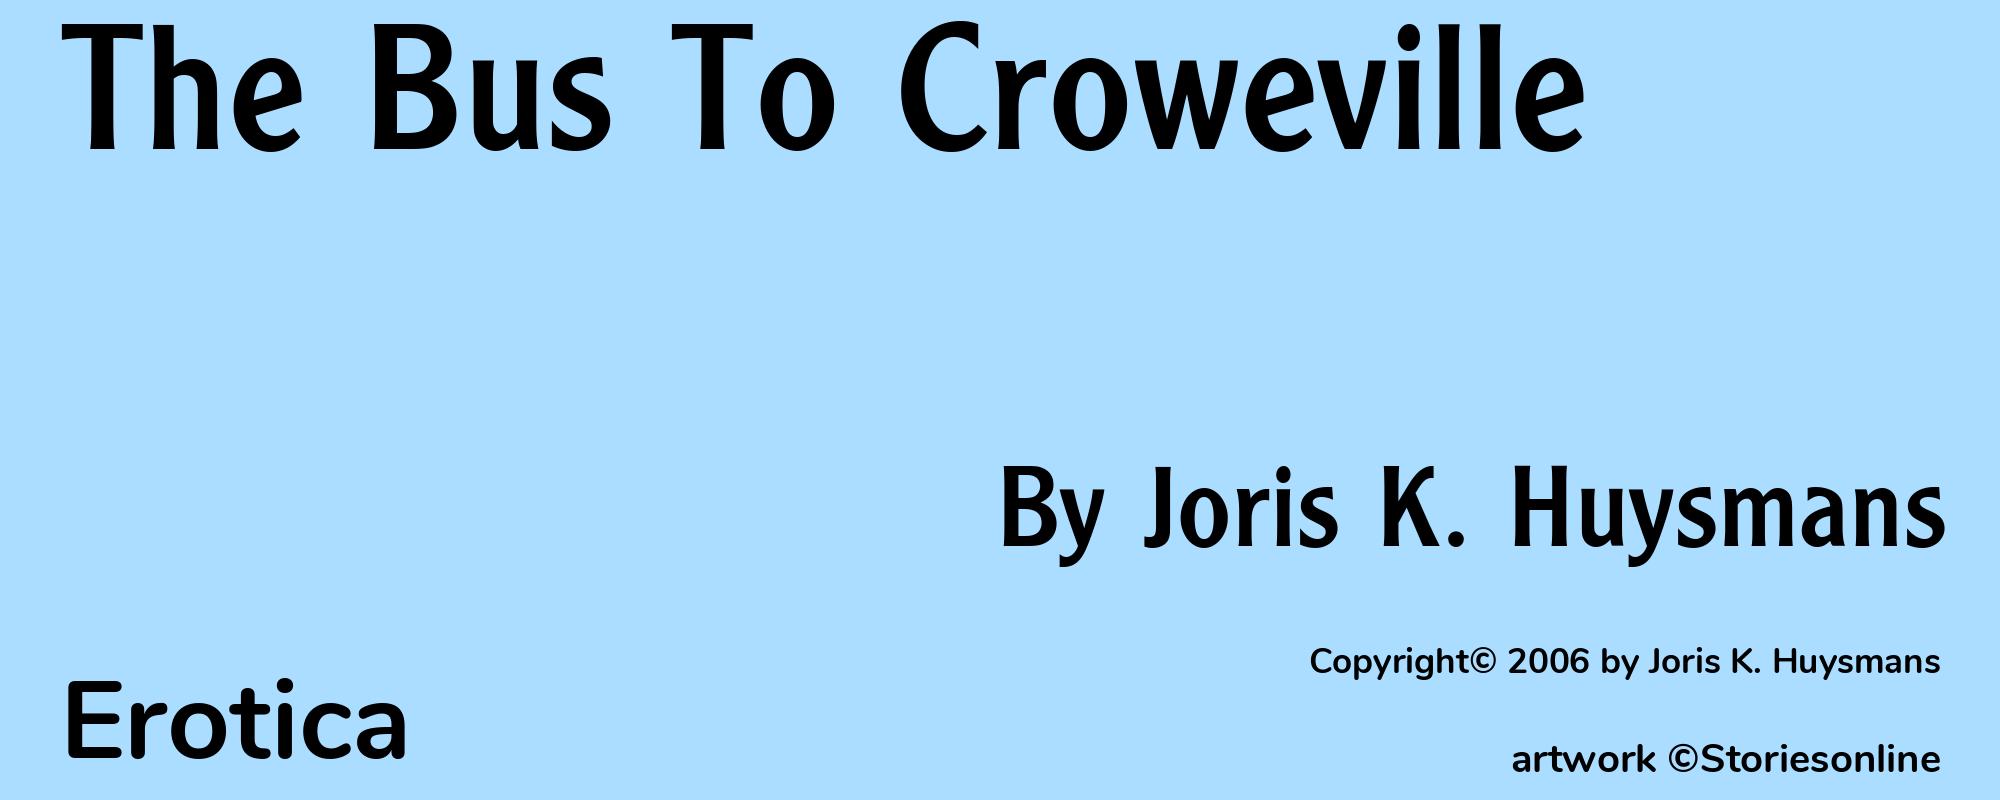 The Bus To Croweville - Cover